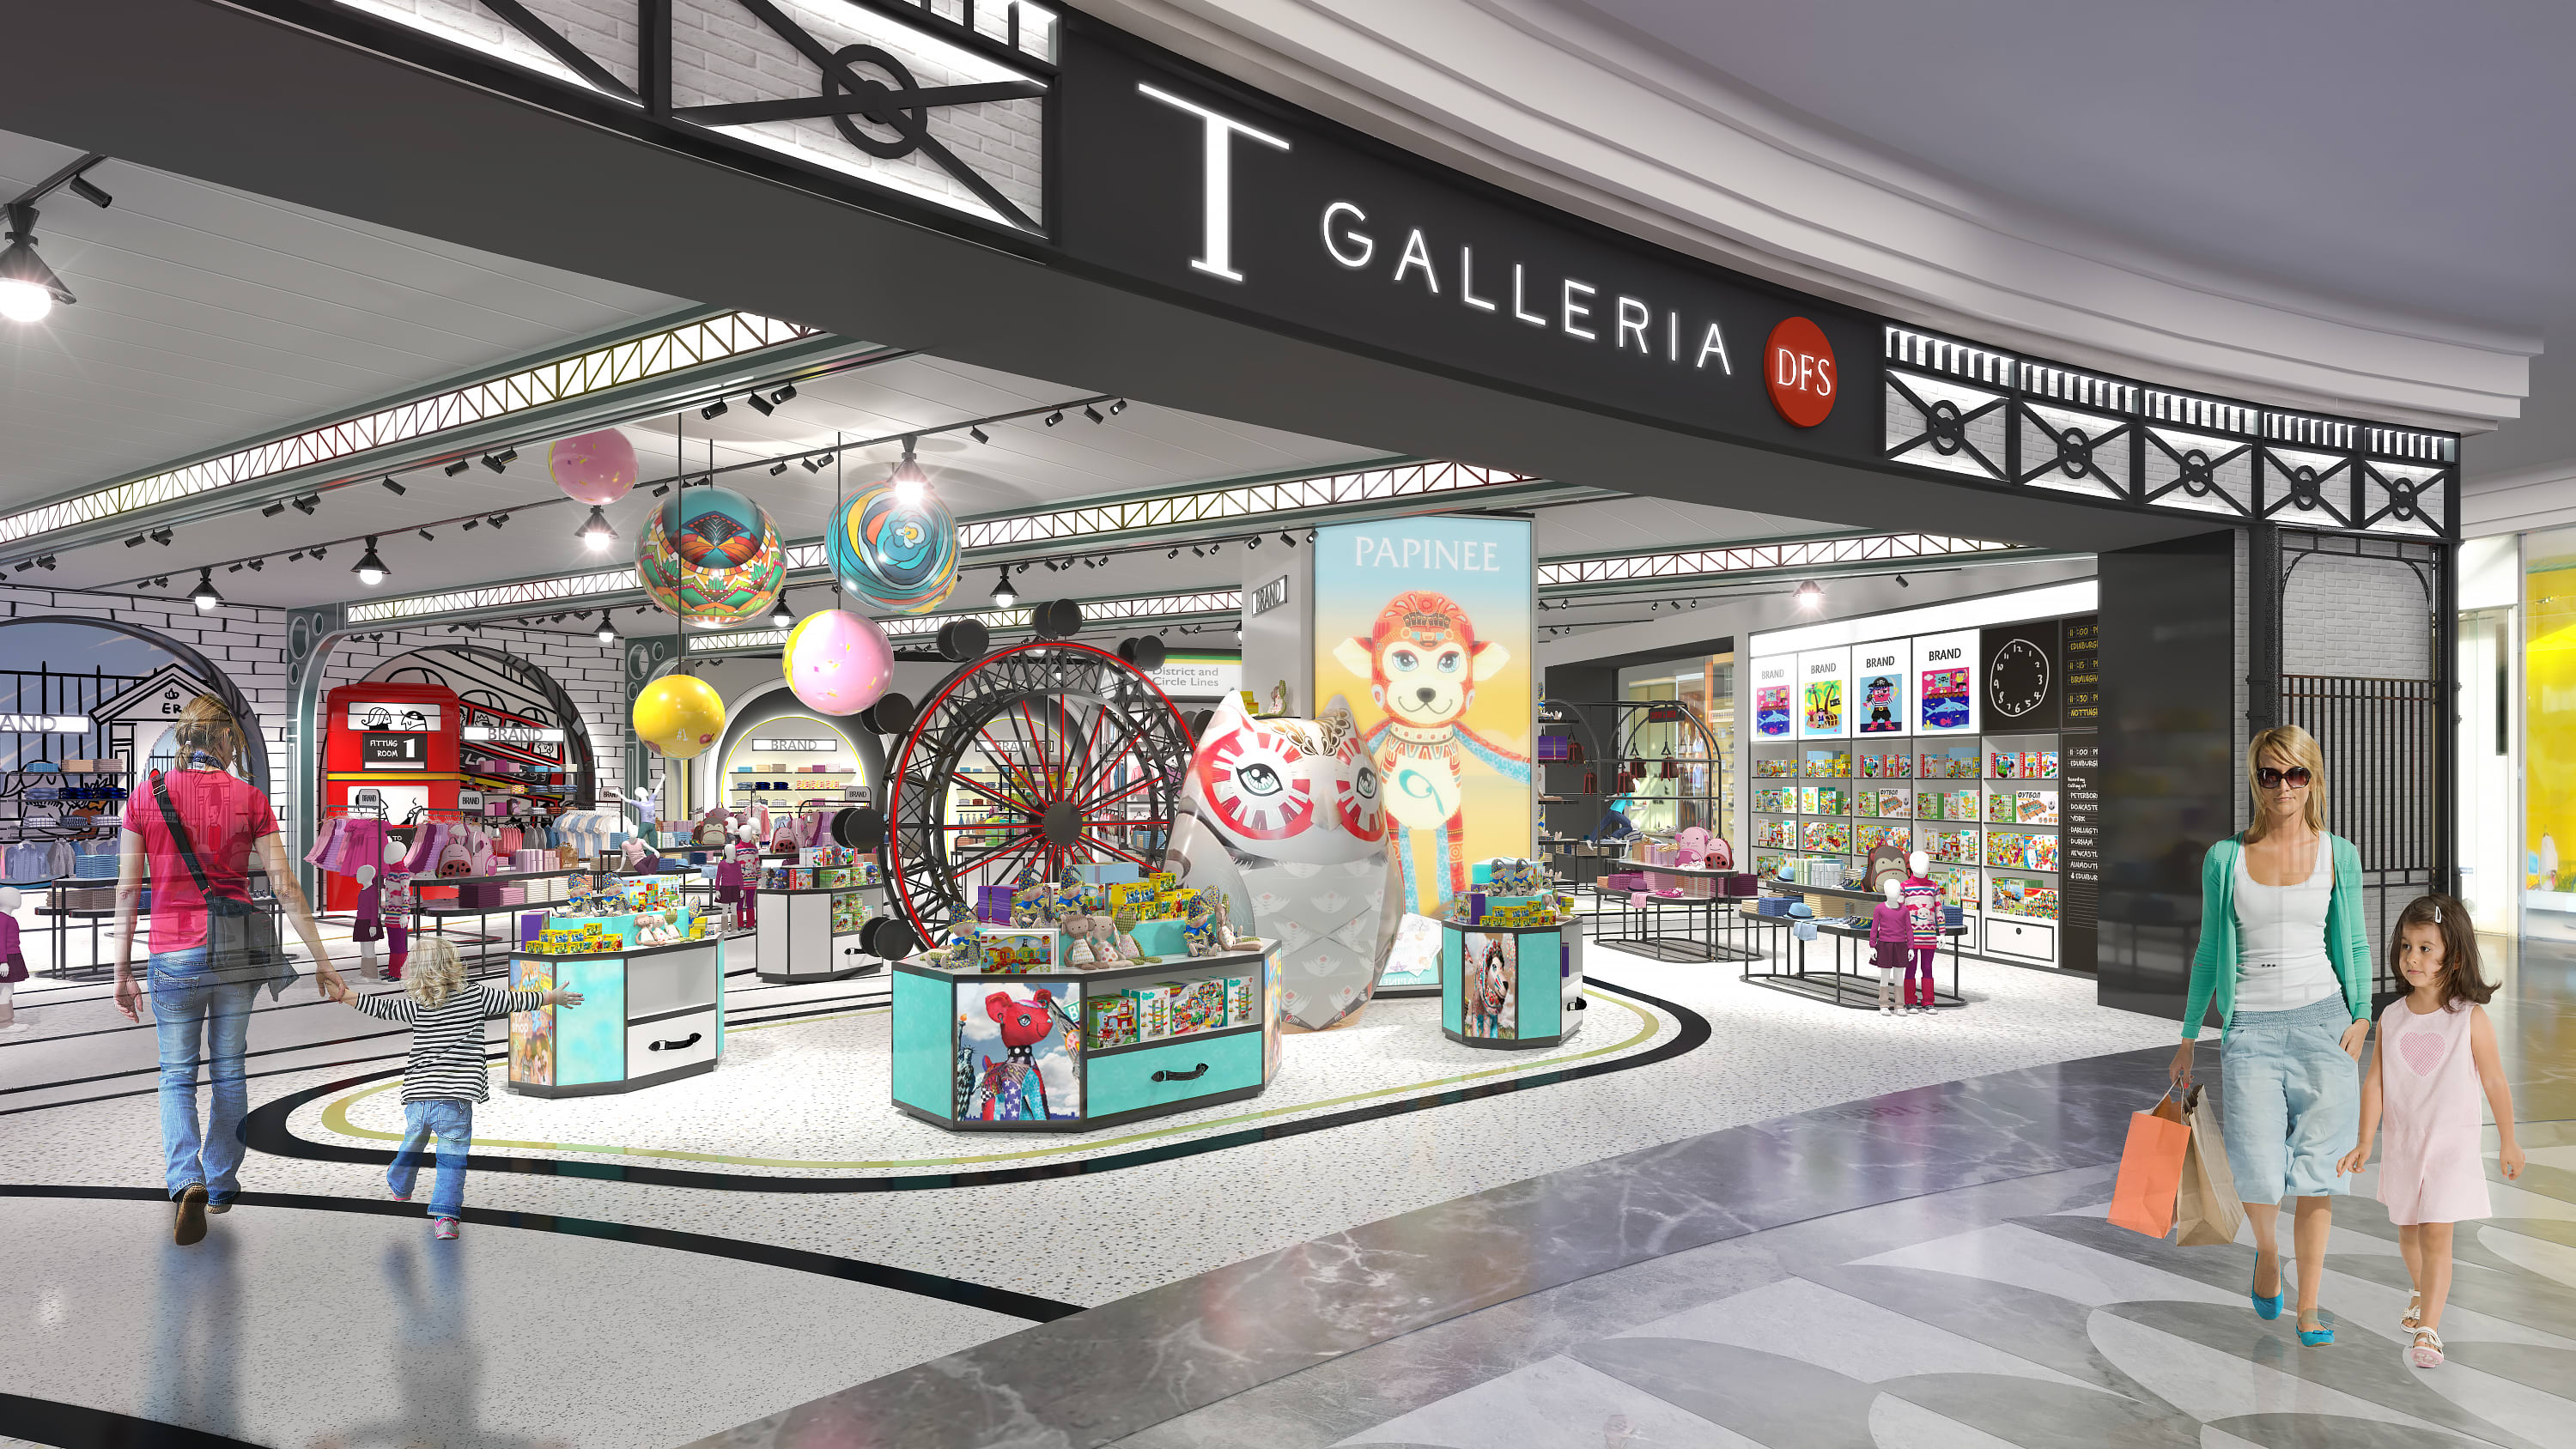 DFS Galleria Duty Free Outlet Hong Kong Editorial Photo - Image of  presents, sweets: 29524386